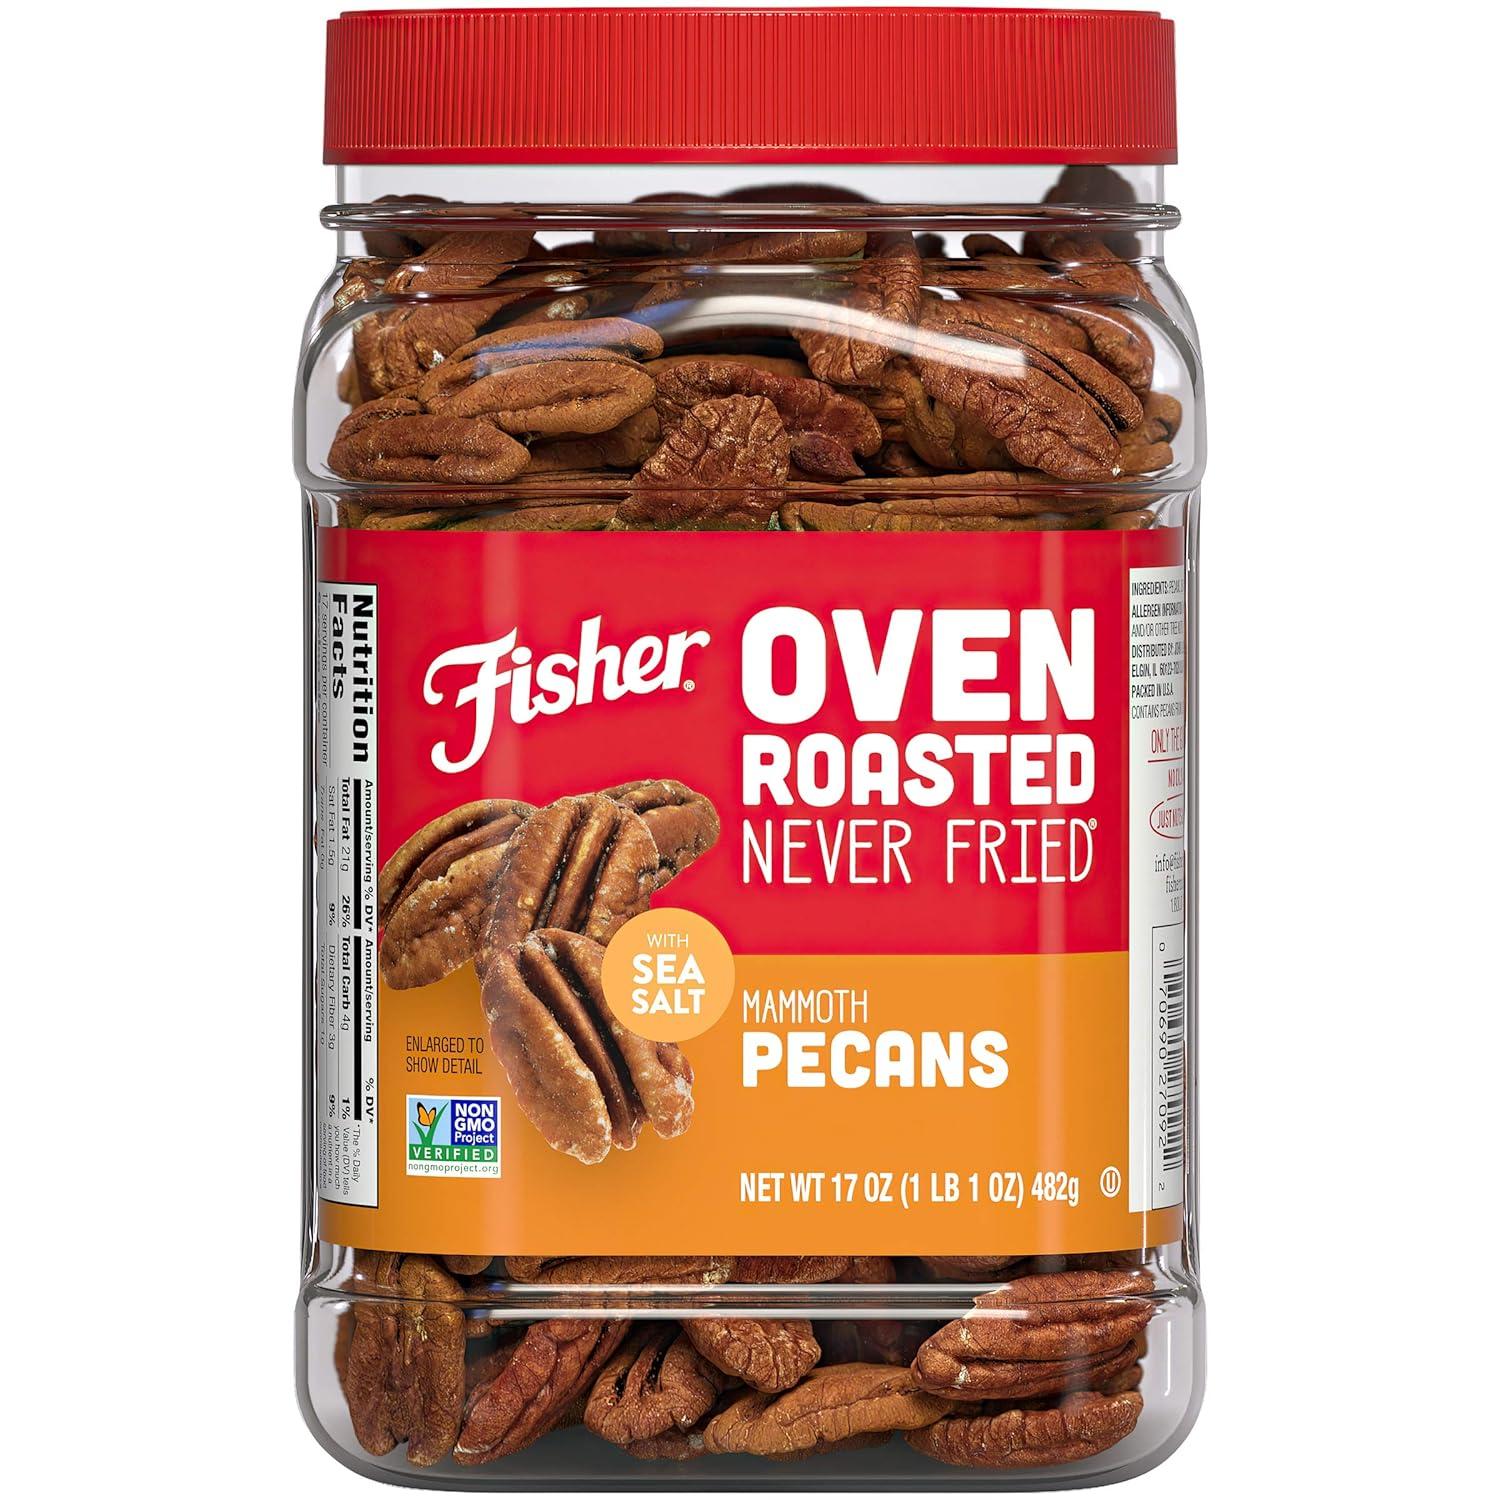 Fisher Snack Oven Roasted Never Fried Mammoth Pecans for $9.98